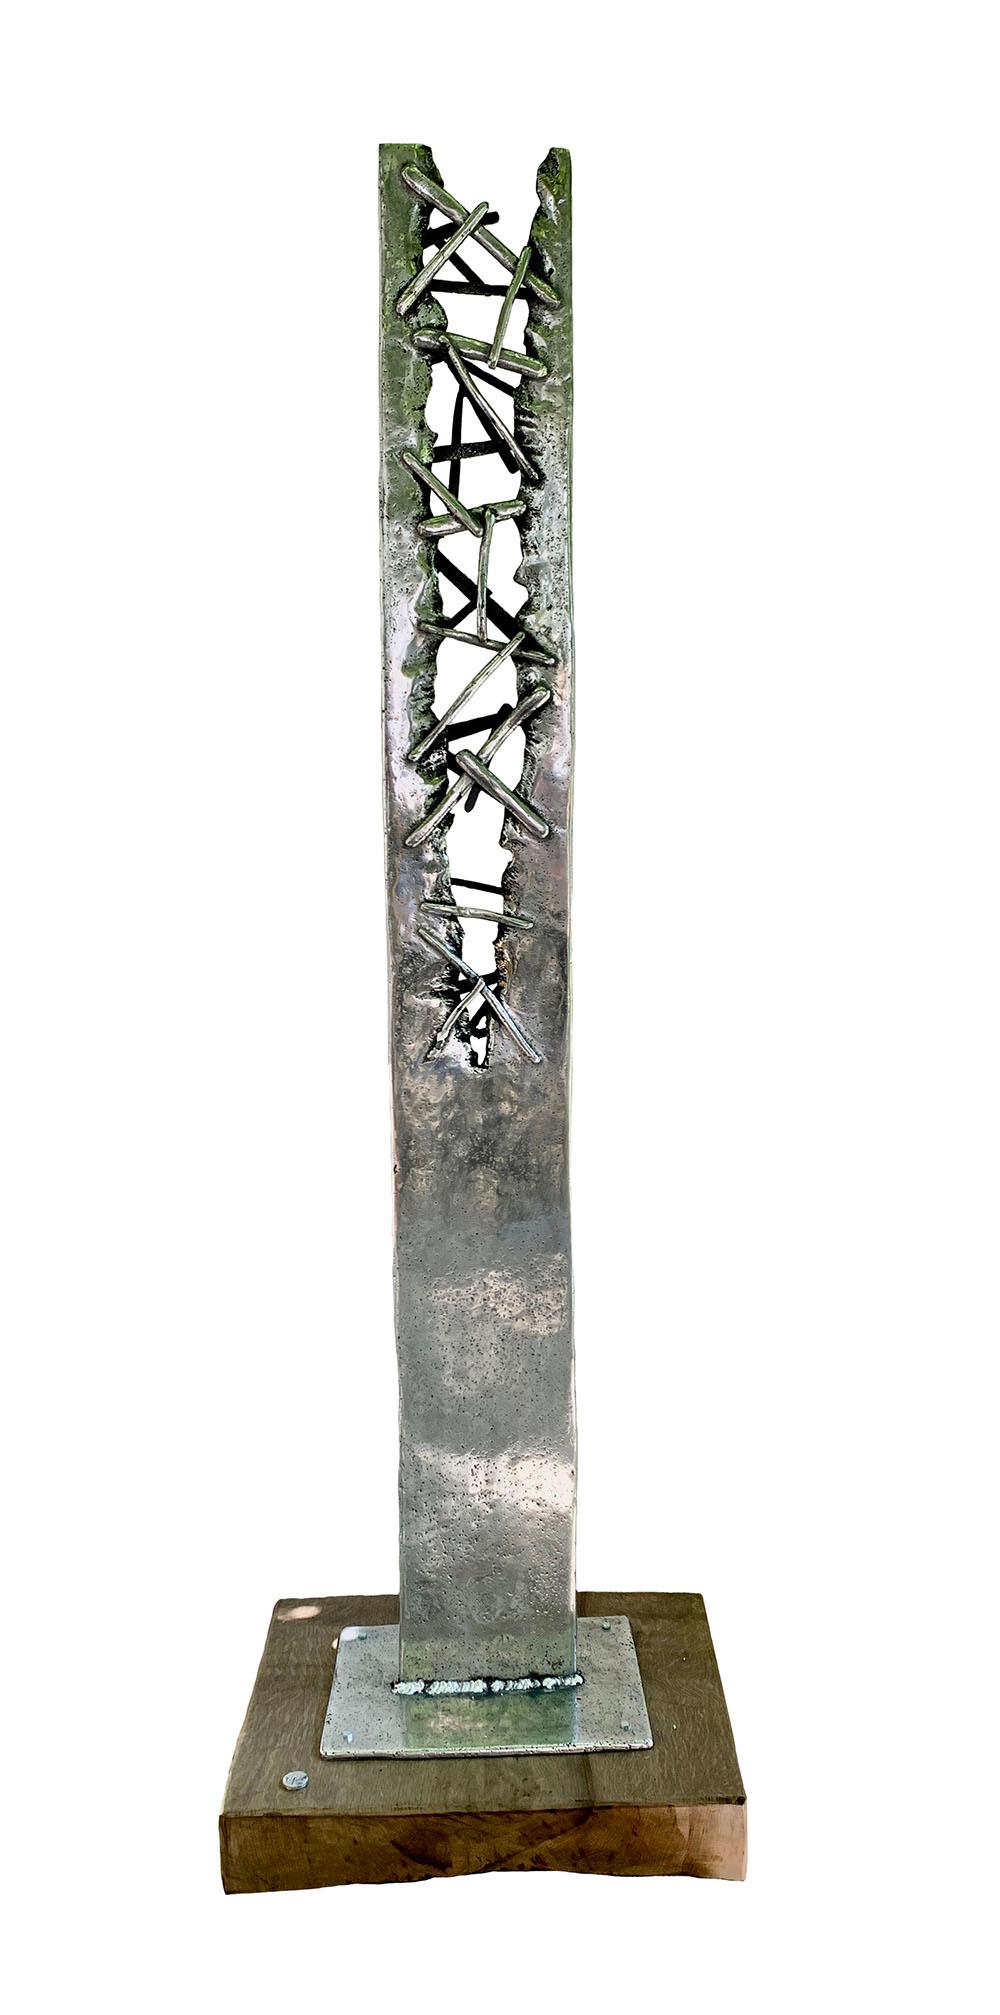 Abstract Out and Indoor Sculpture Aluminium Totem Wood base Croxet